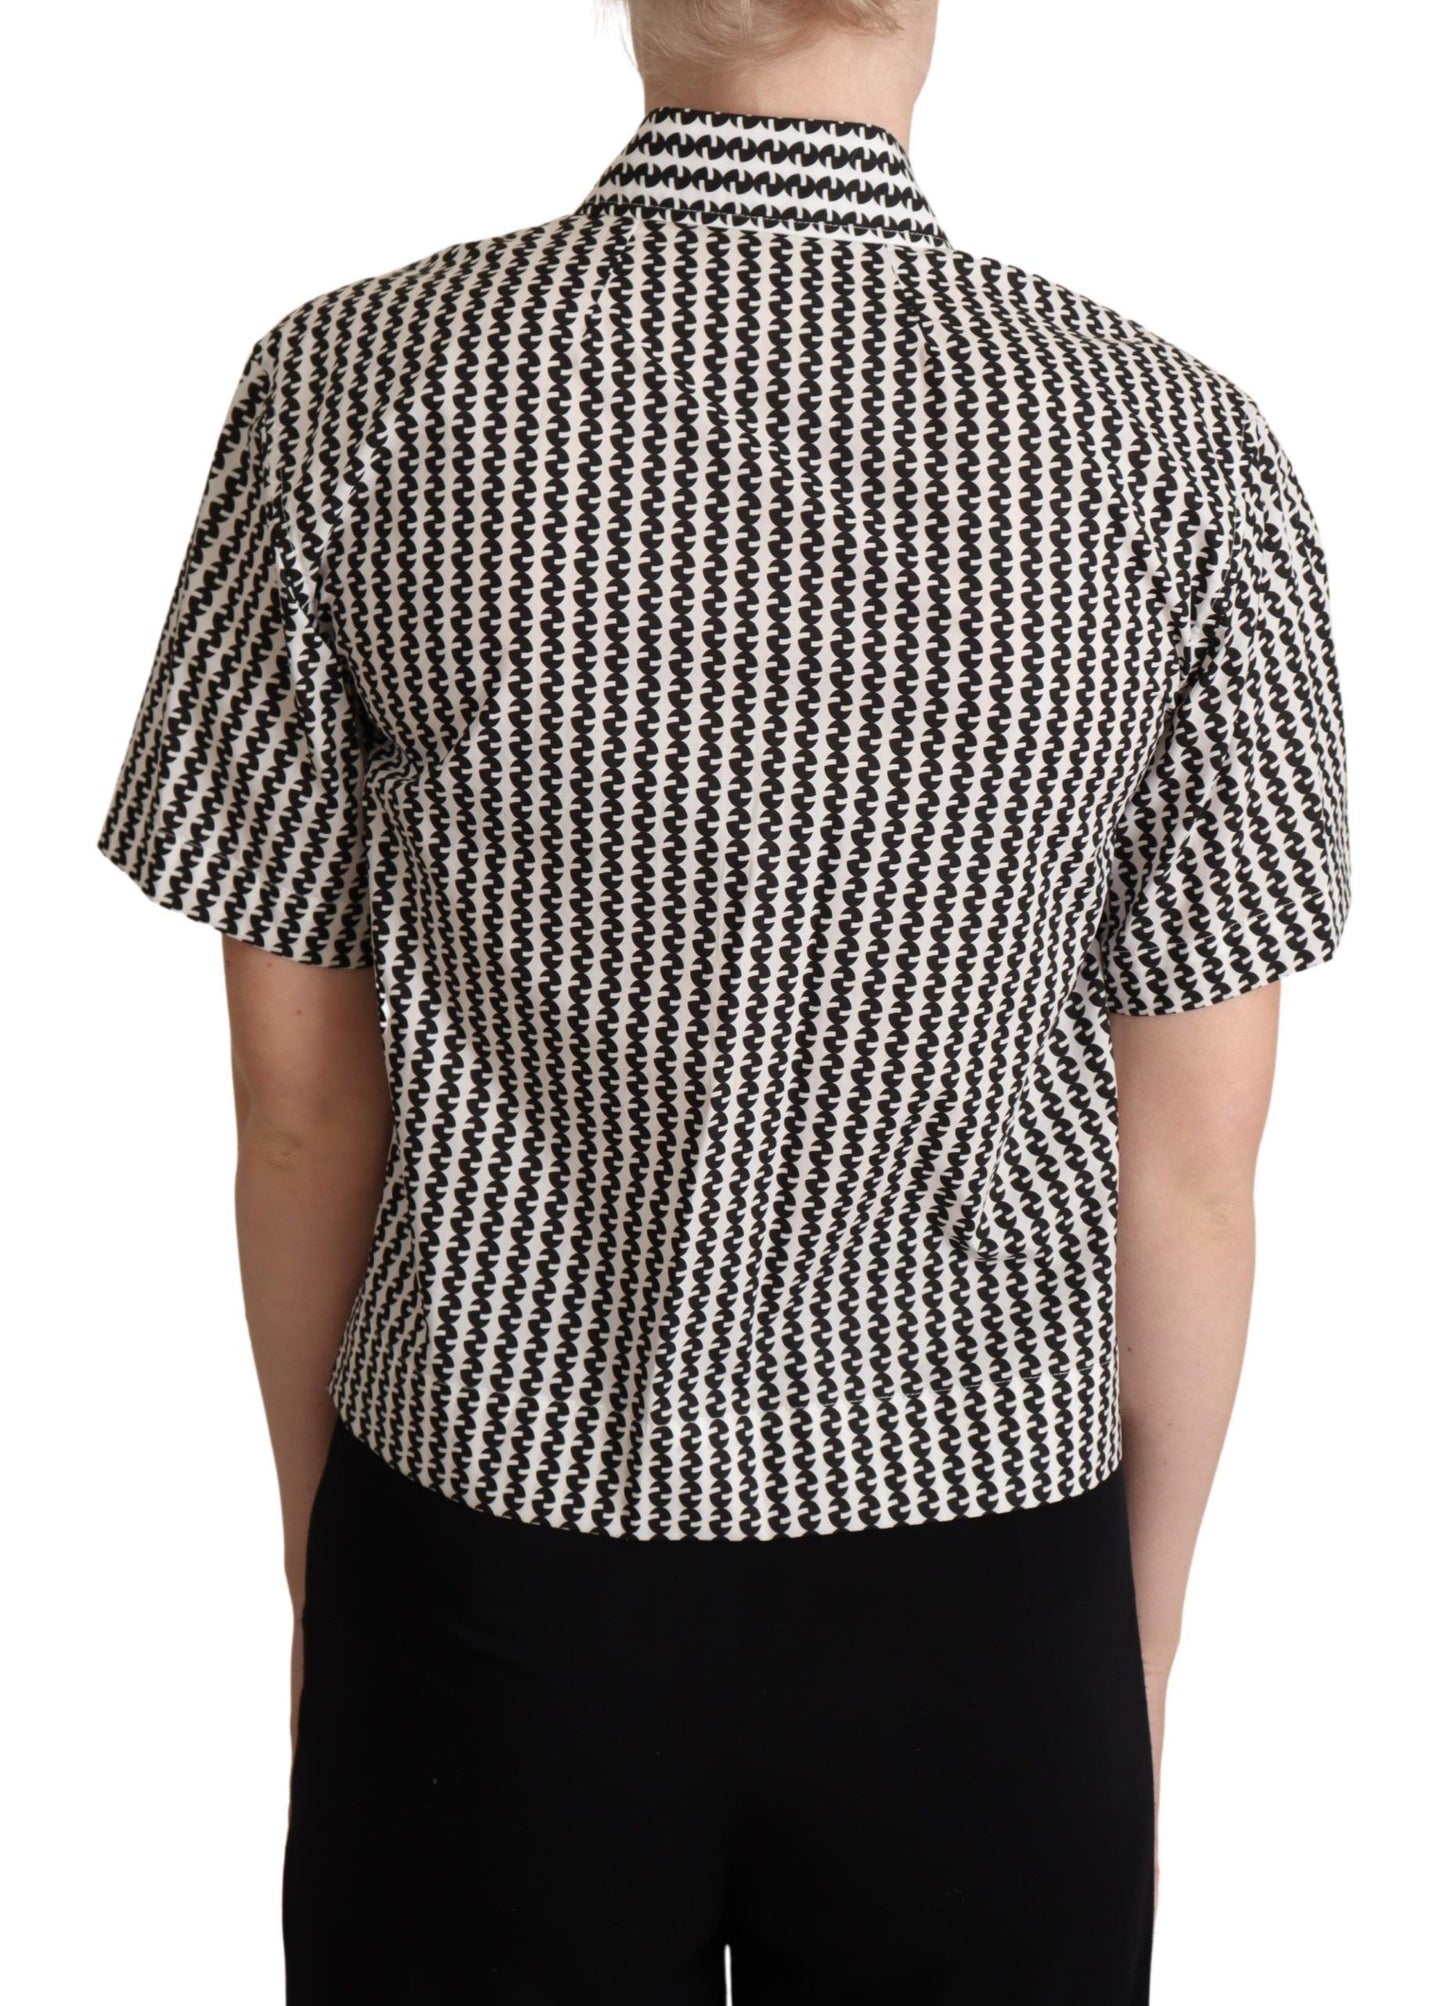 Elegant Black and White Patterned Cotton Polo